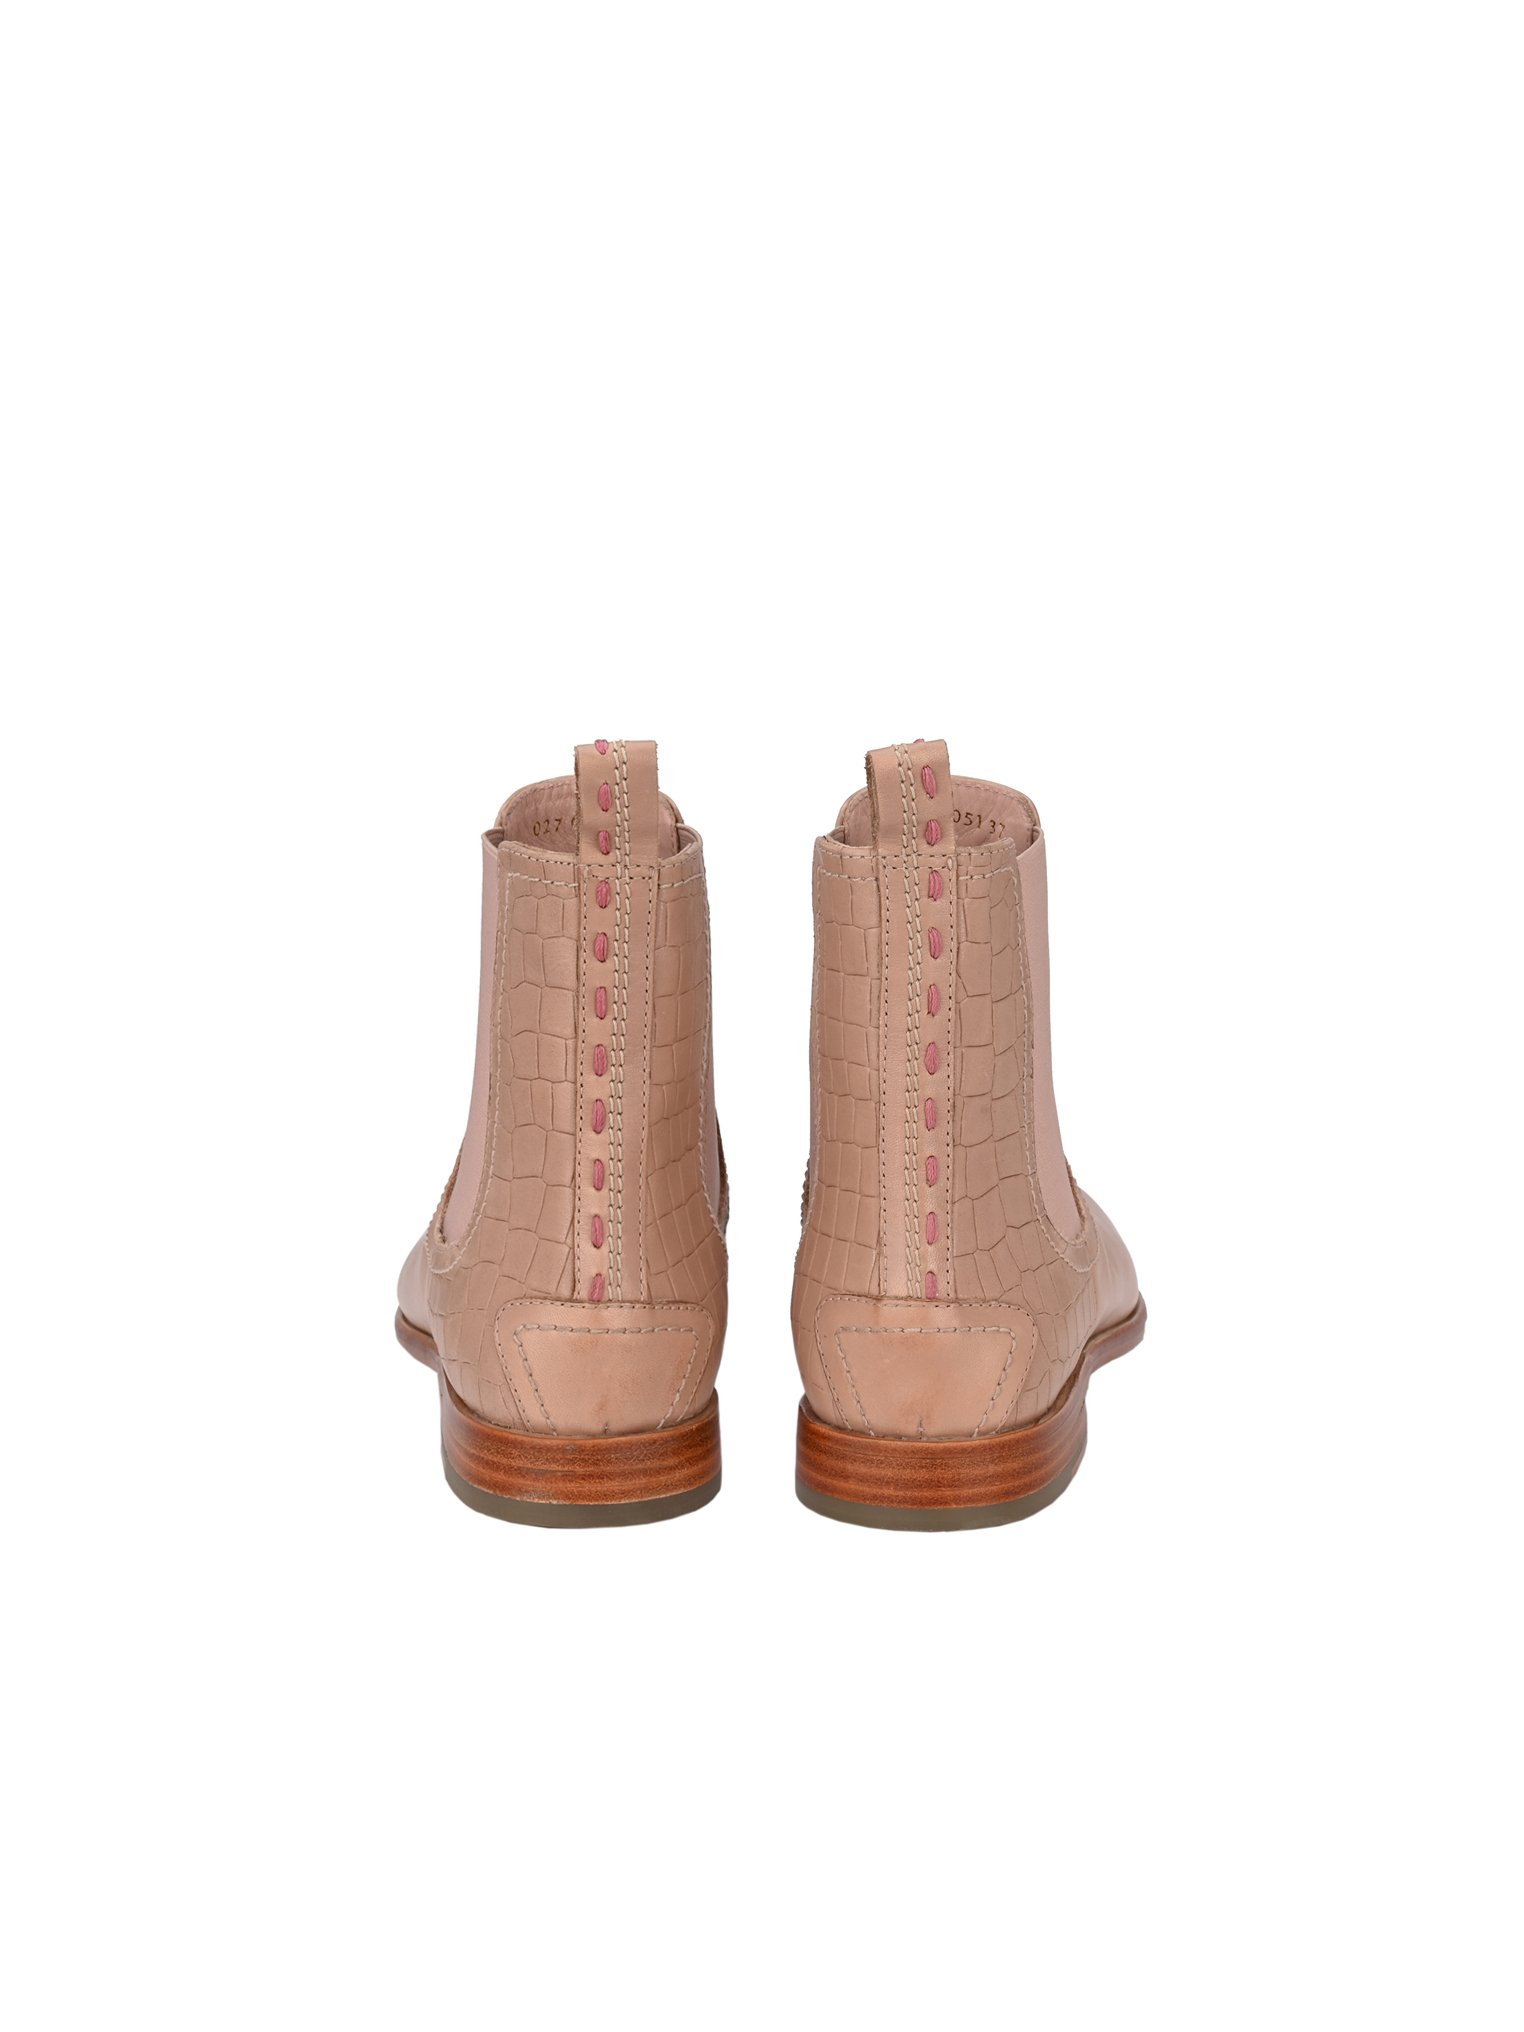 Crickit Chelsea Boot Janna in Camel, Champagner 